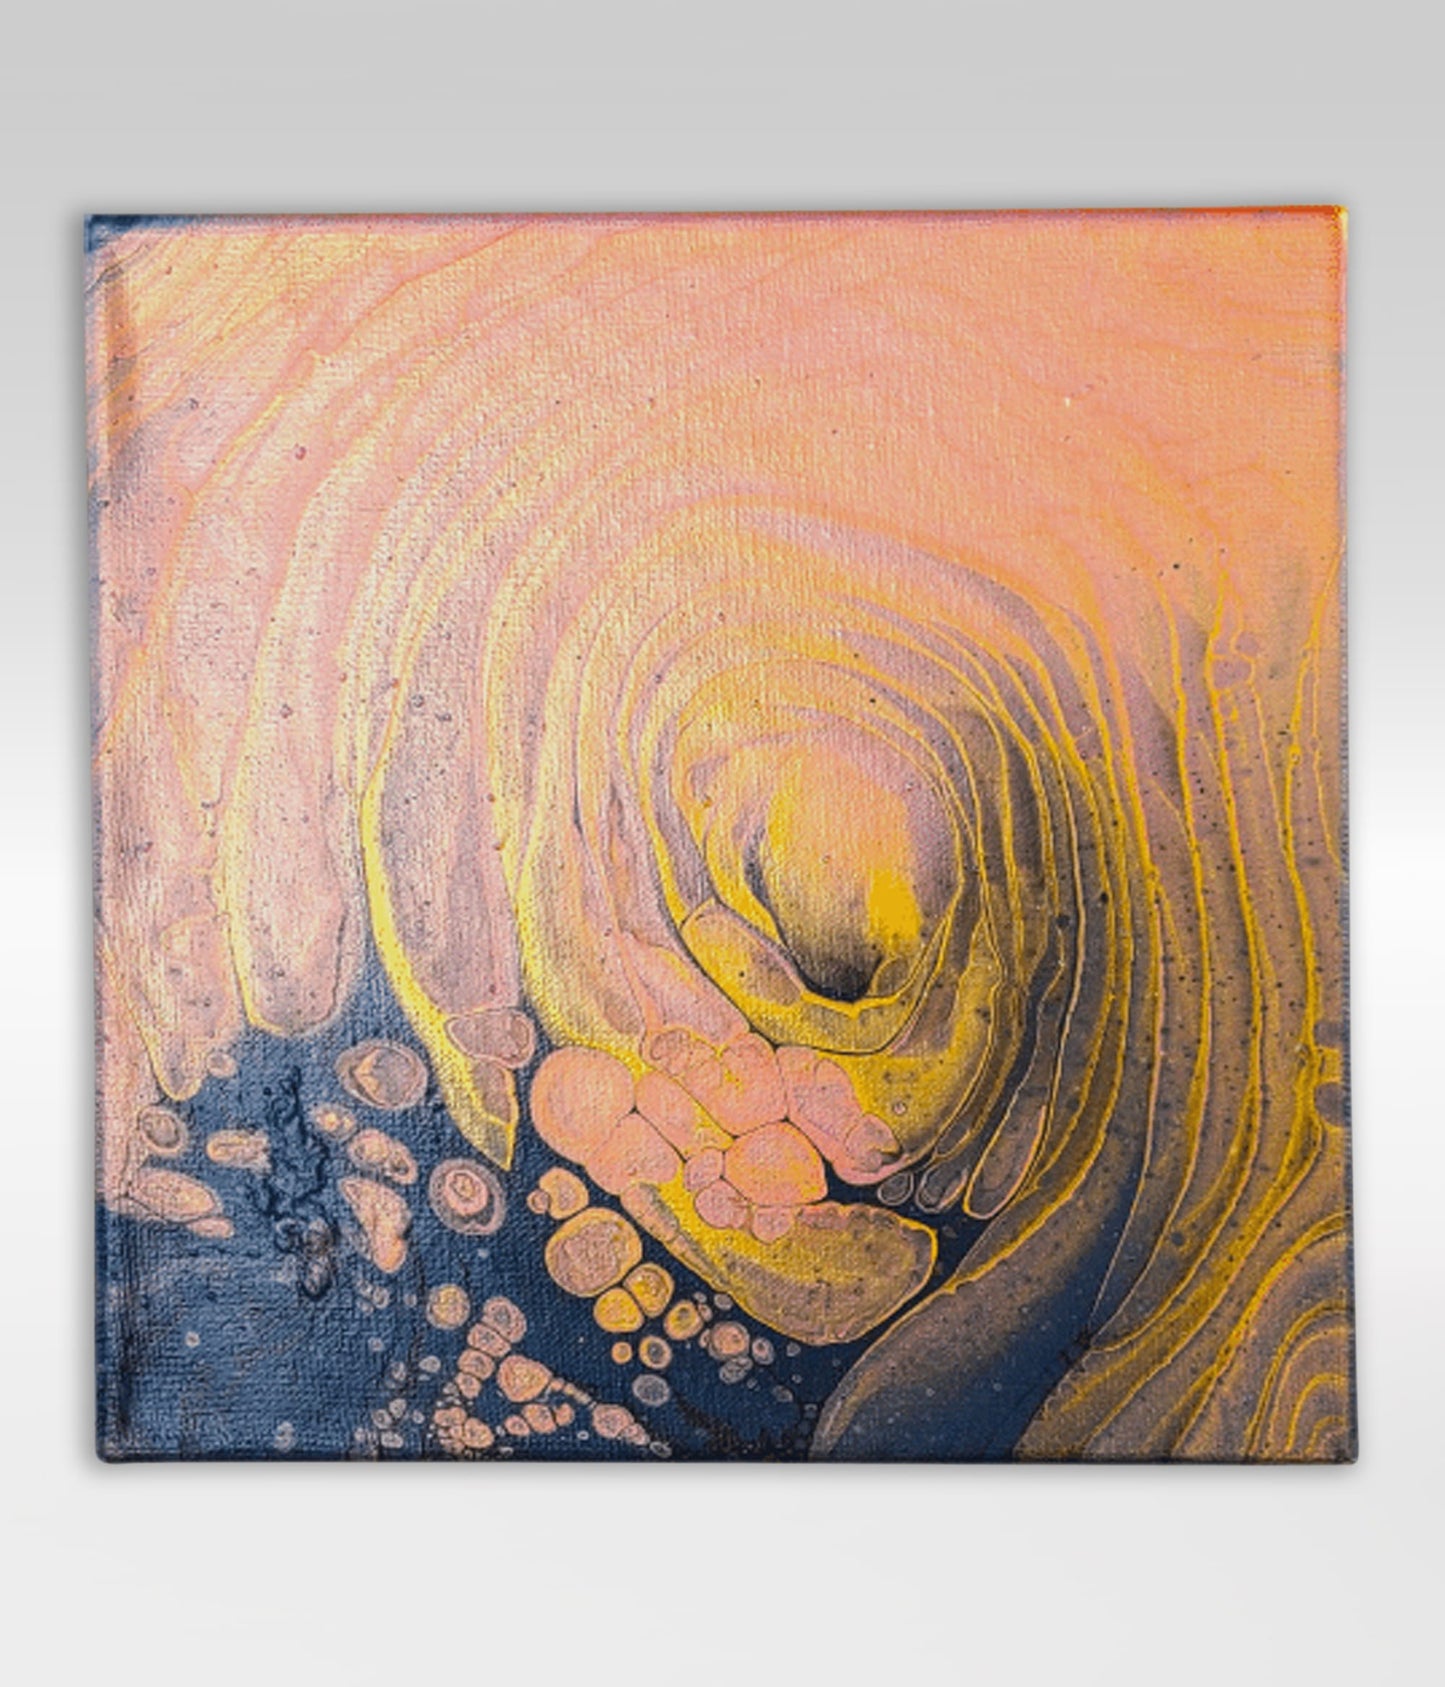 Decorrosion – 10 x 10 Acrylic Pour Painting On Canvas